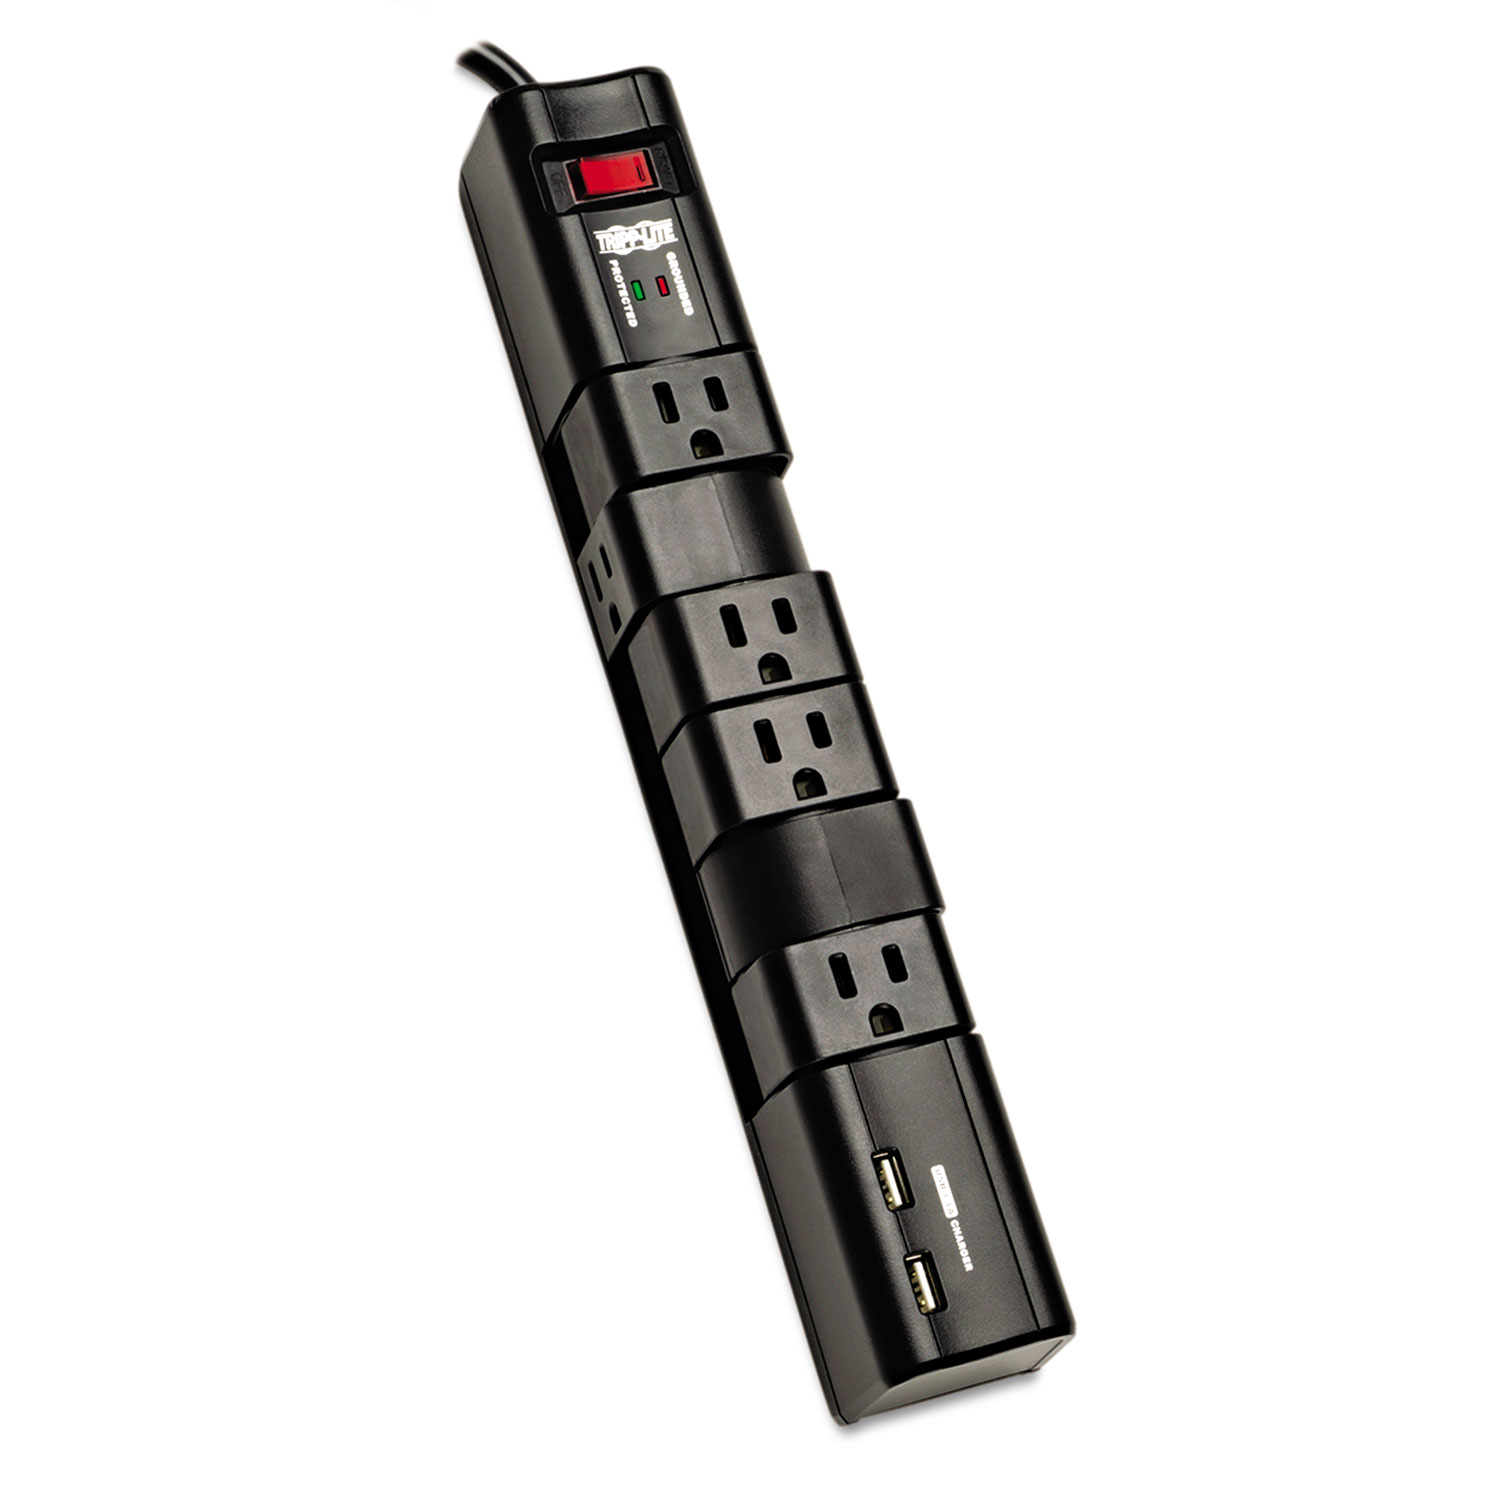  Tripp Lite TLP608RUSBB Protect It! Surge Protector, 6 Outlets/2 USB, 8 ft. Cord, 1080 Joules, Black (TRPTLP608RUSBB) 